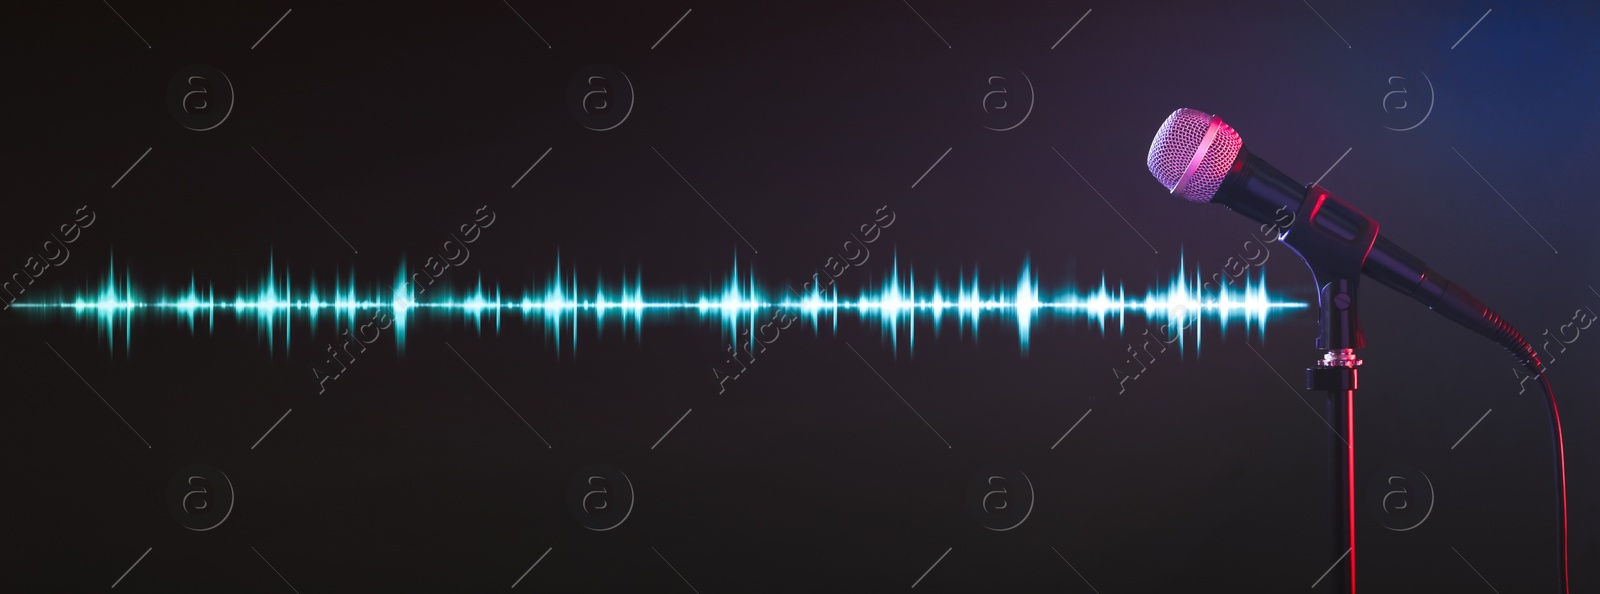 Image of Microphone and radio wave on dark background. Banner design